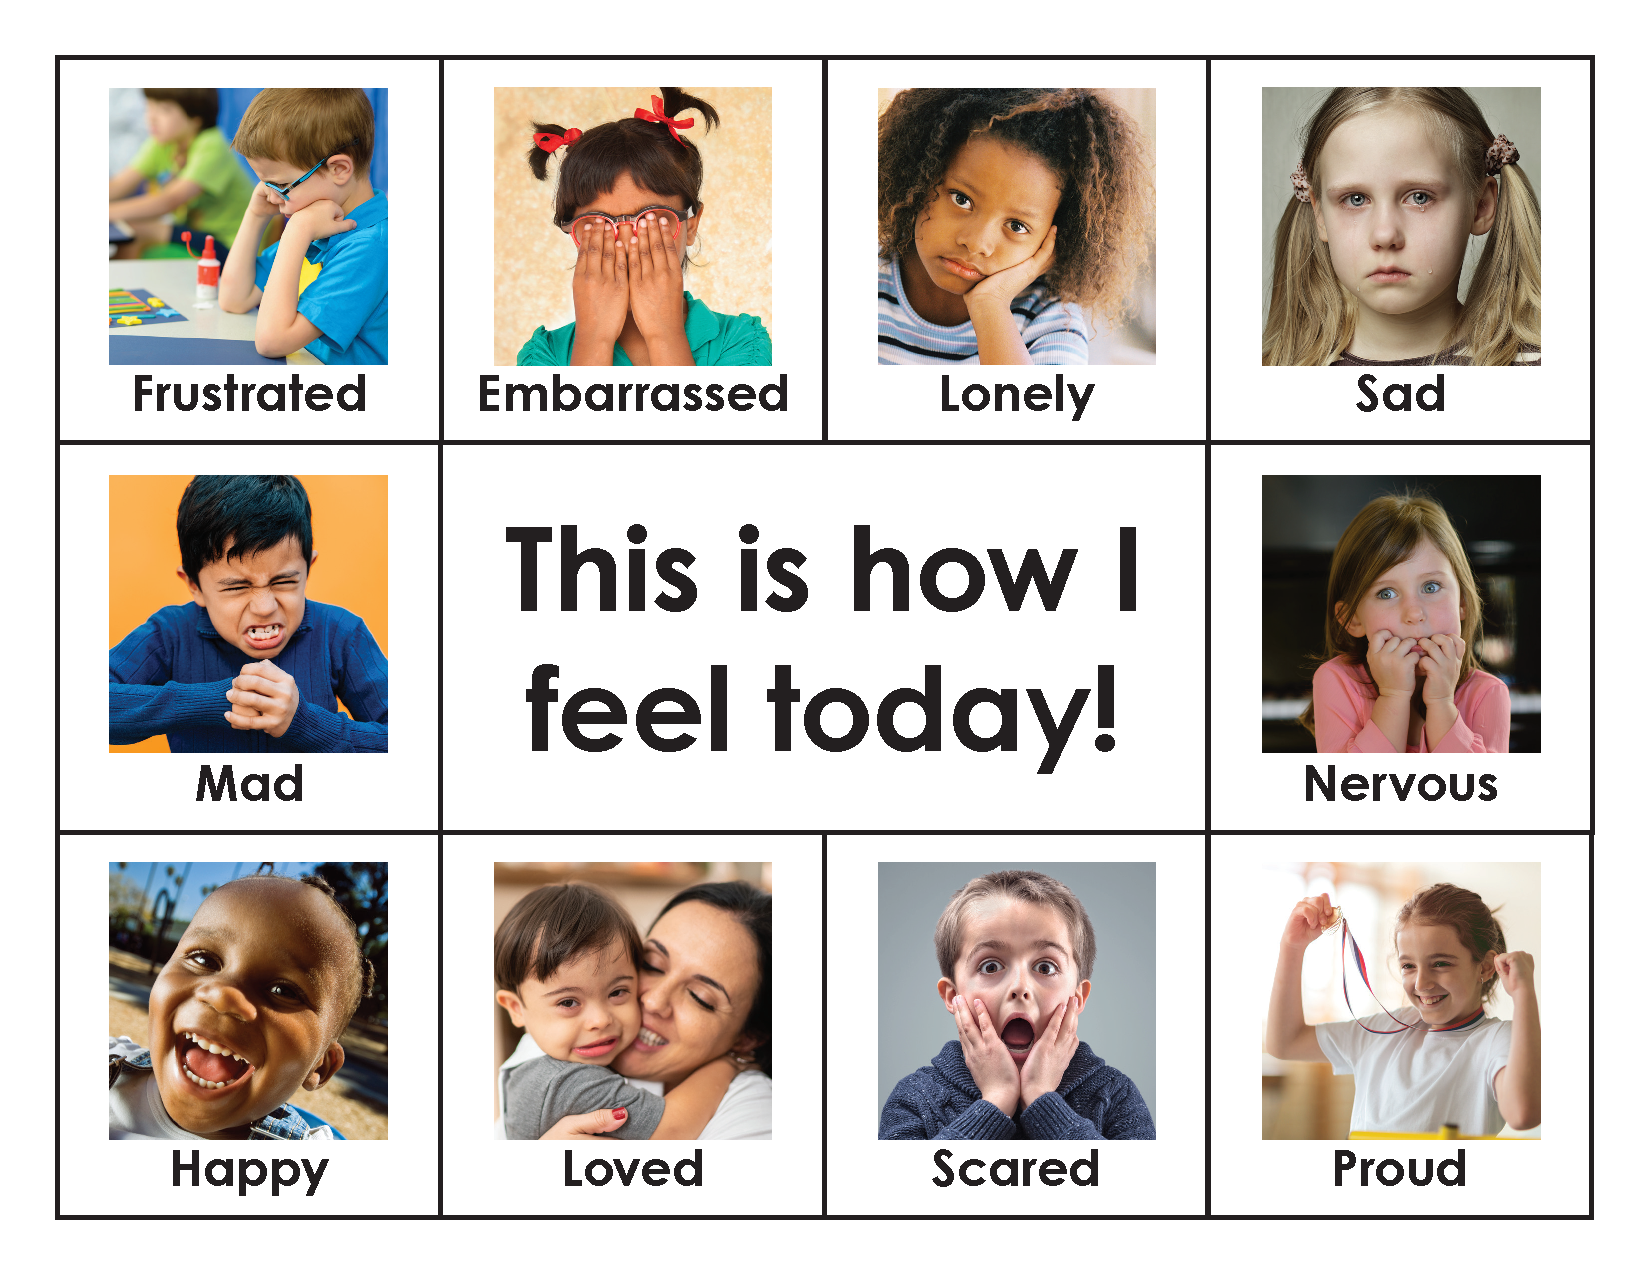 emotions-faces-chart